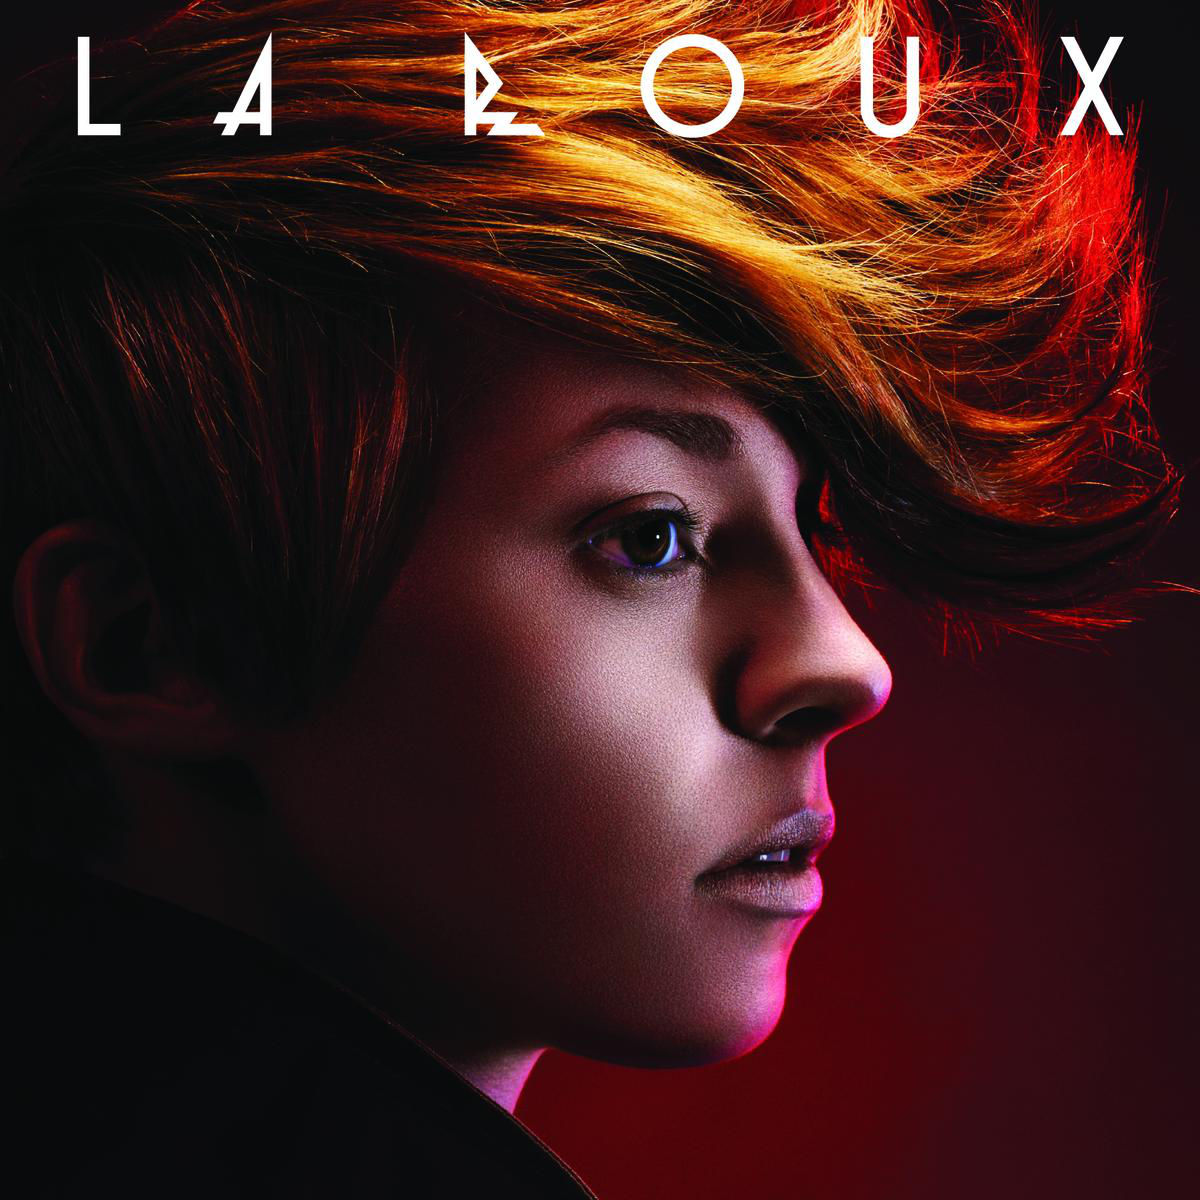 Art for I'm Not Your Toy by La Roux